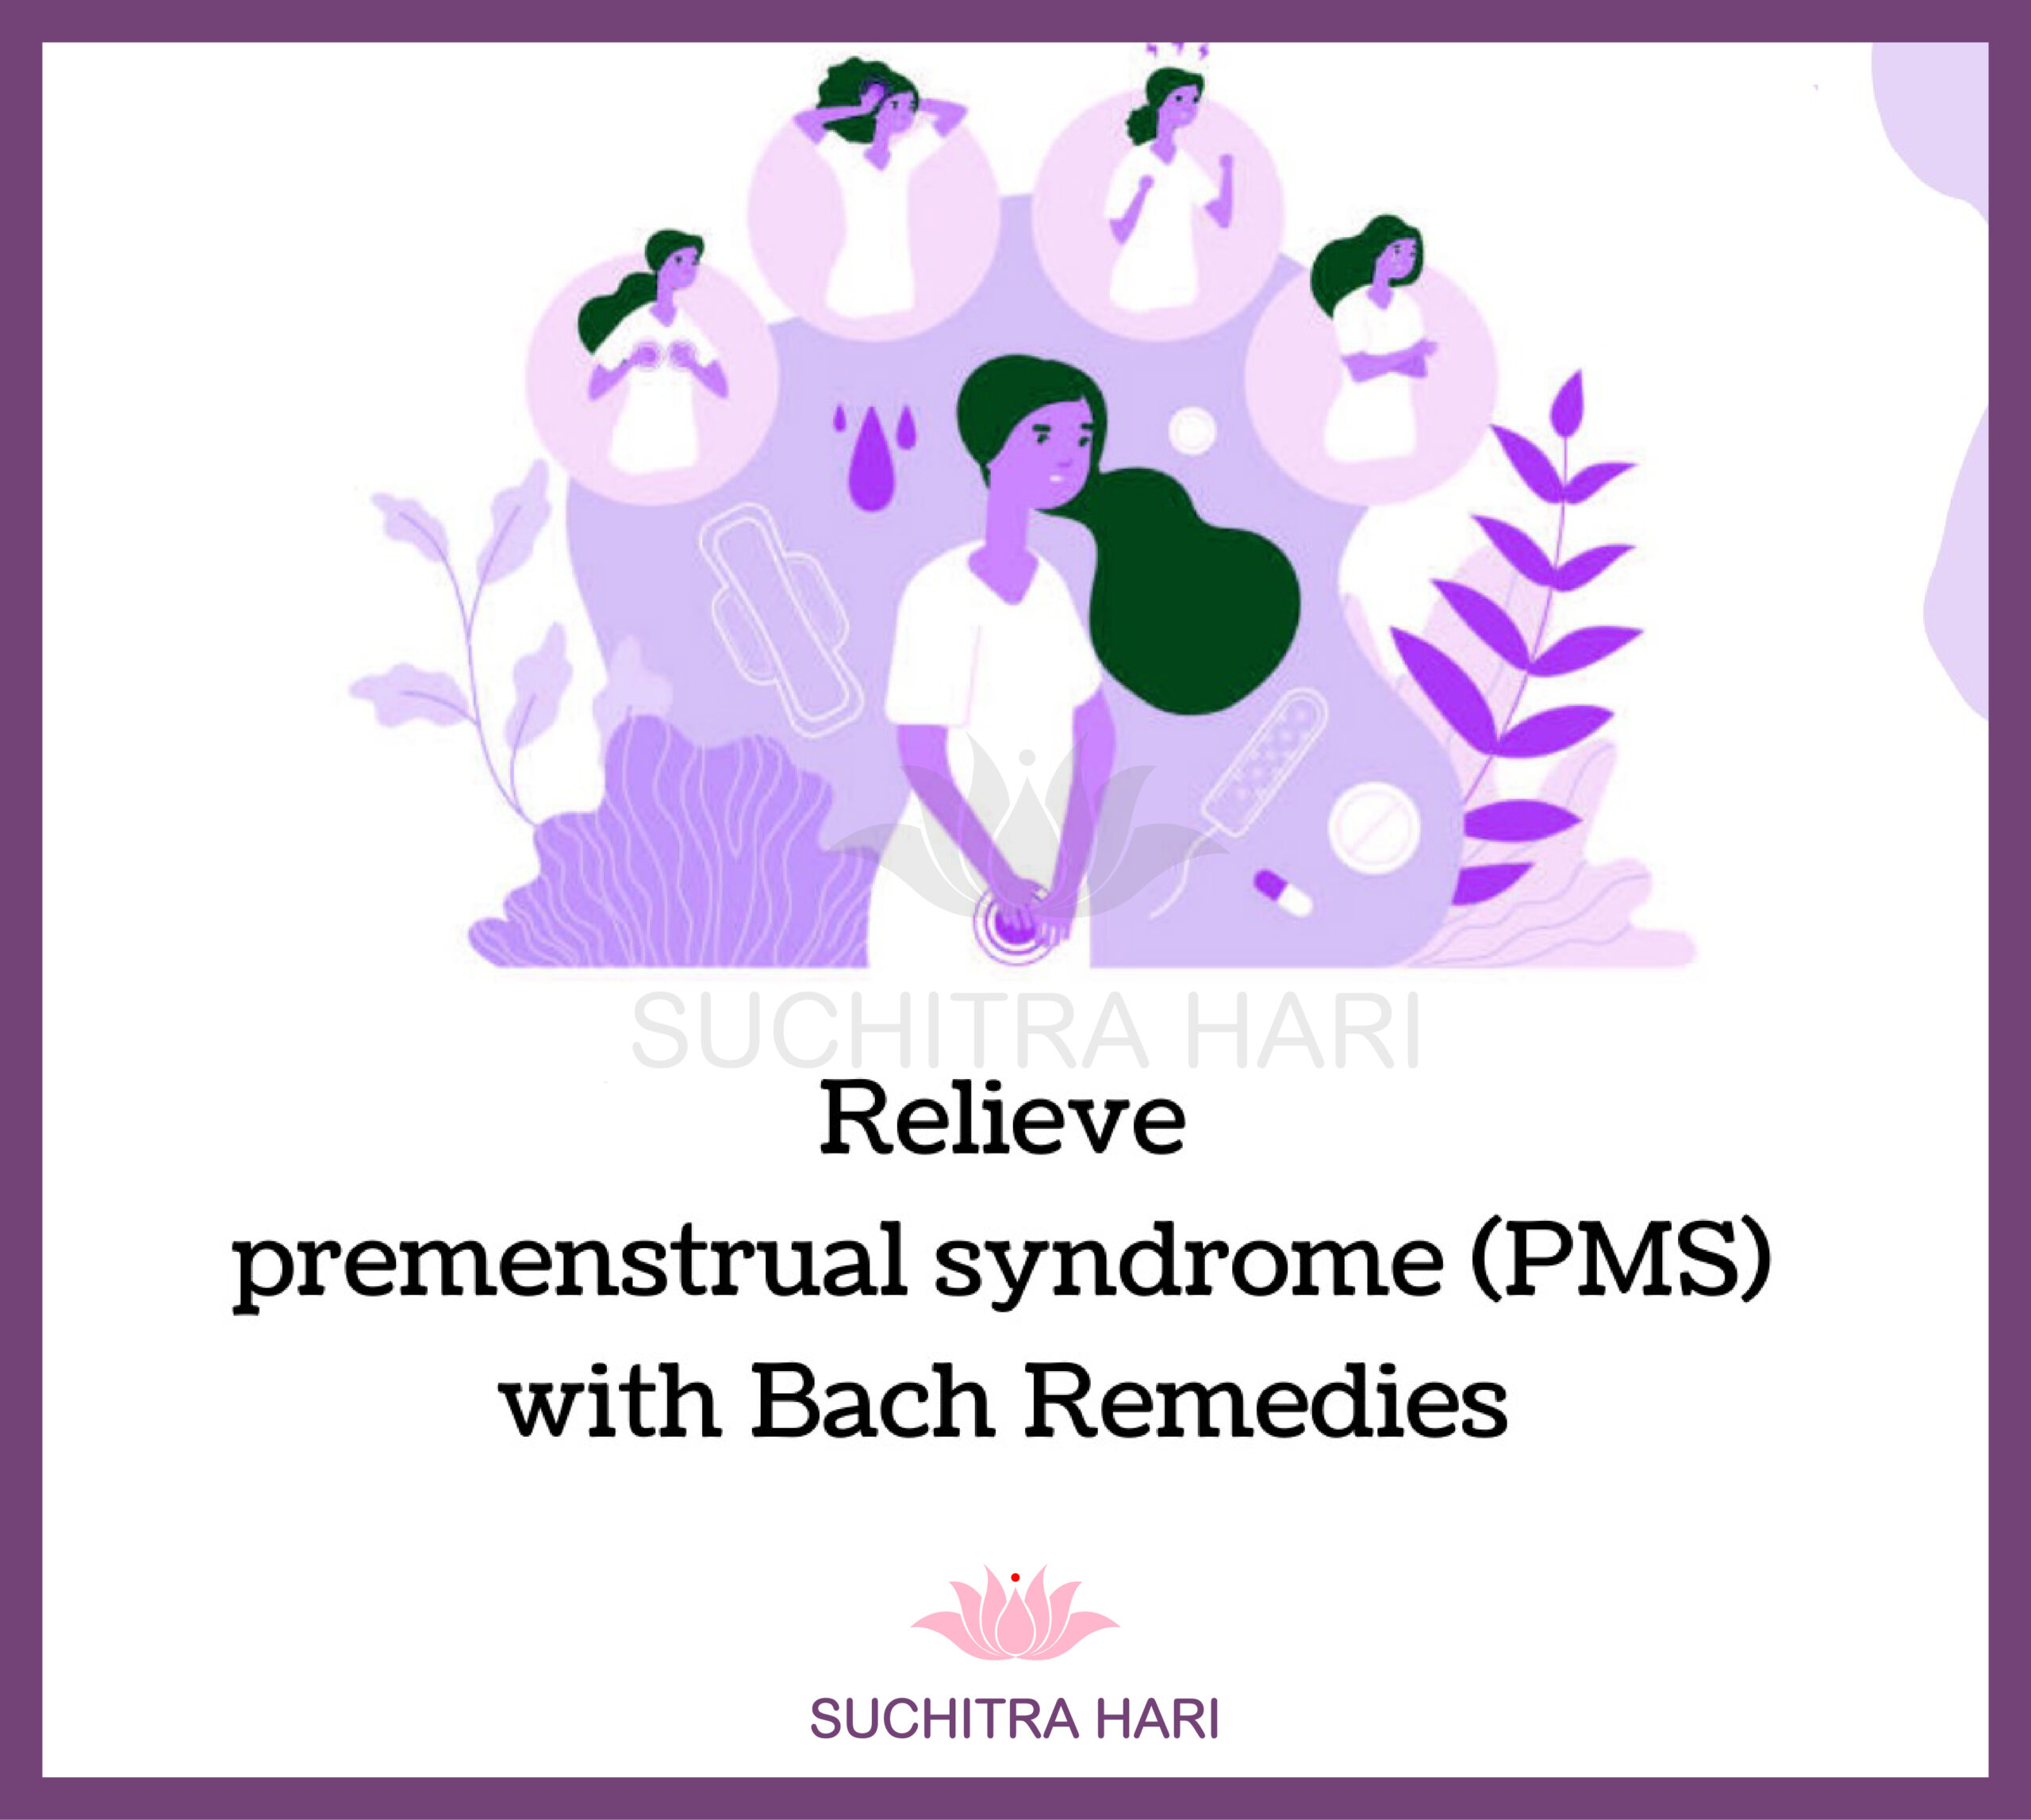 Relieve premenstrual syndrome (PMS) with Bach Remedies